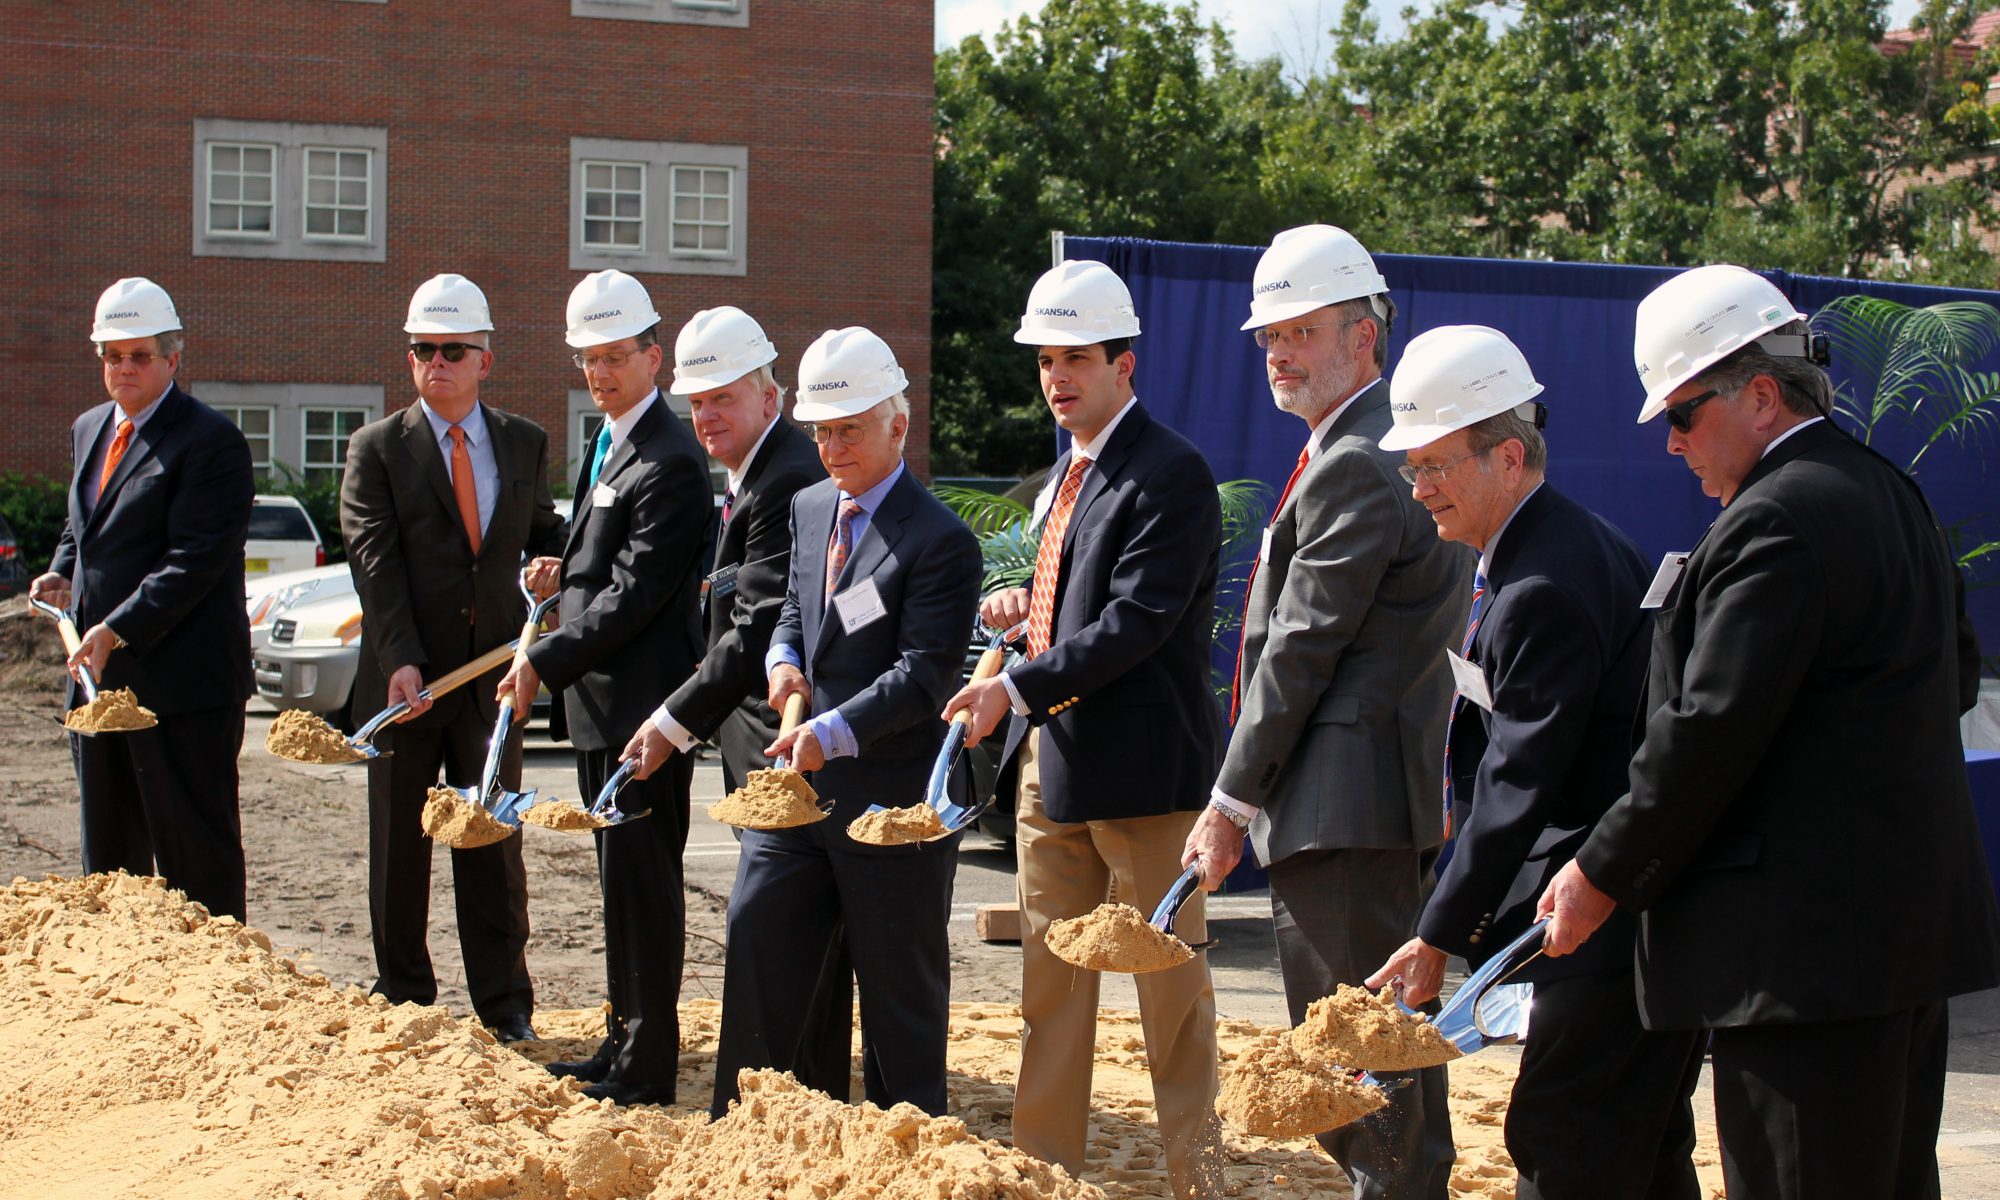 A group of men hold shovels at the ceremonial groundbreaking